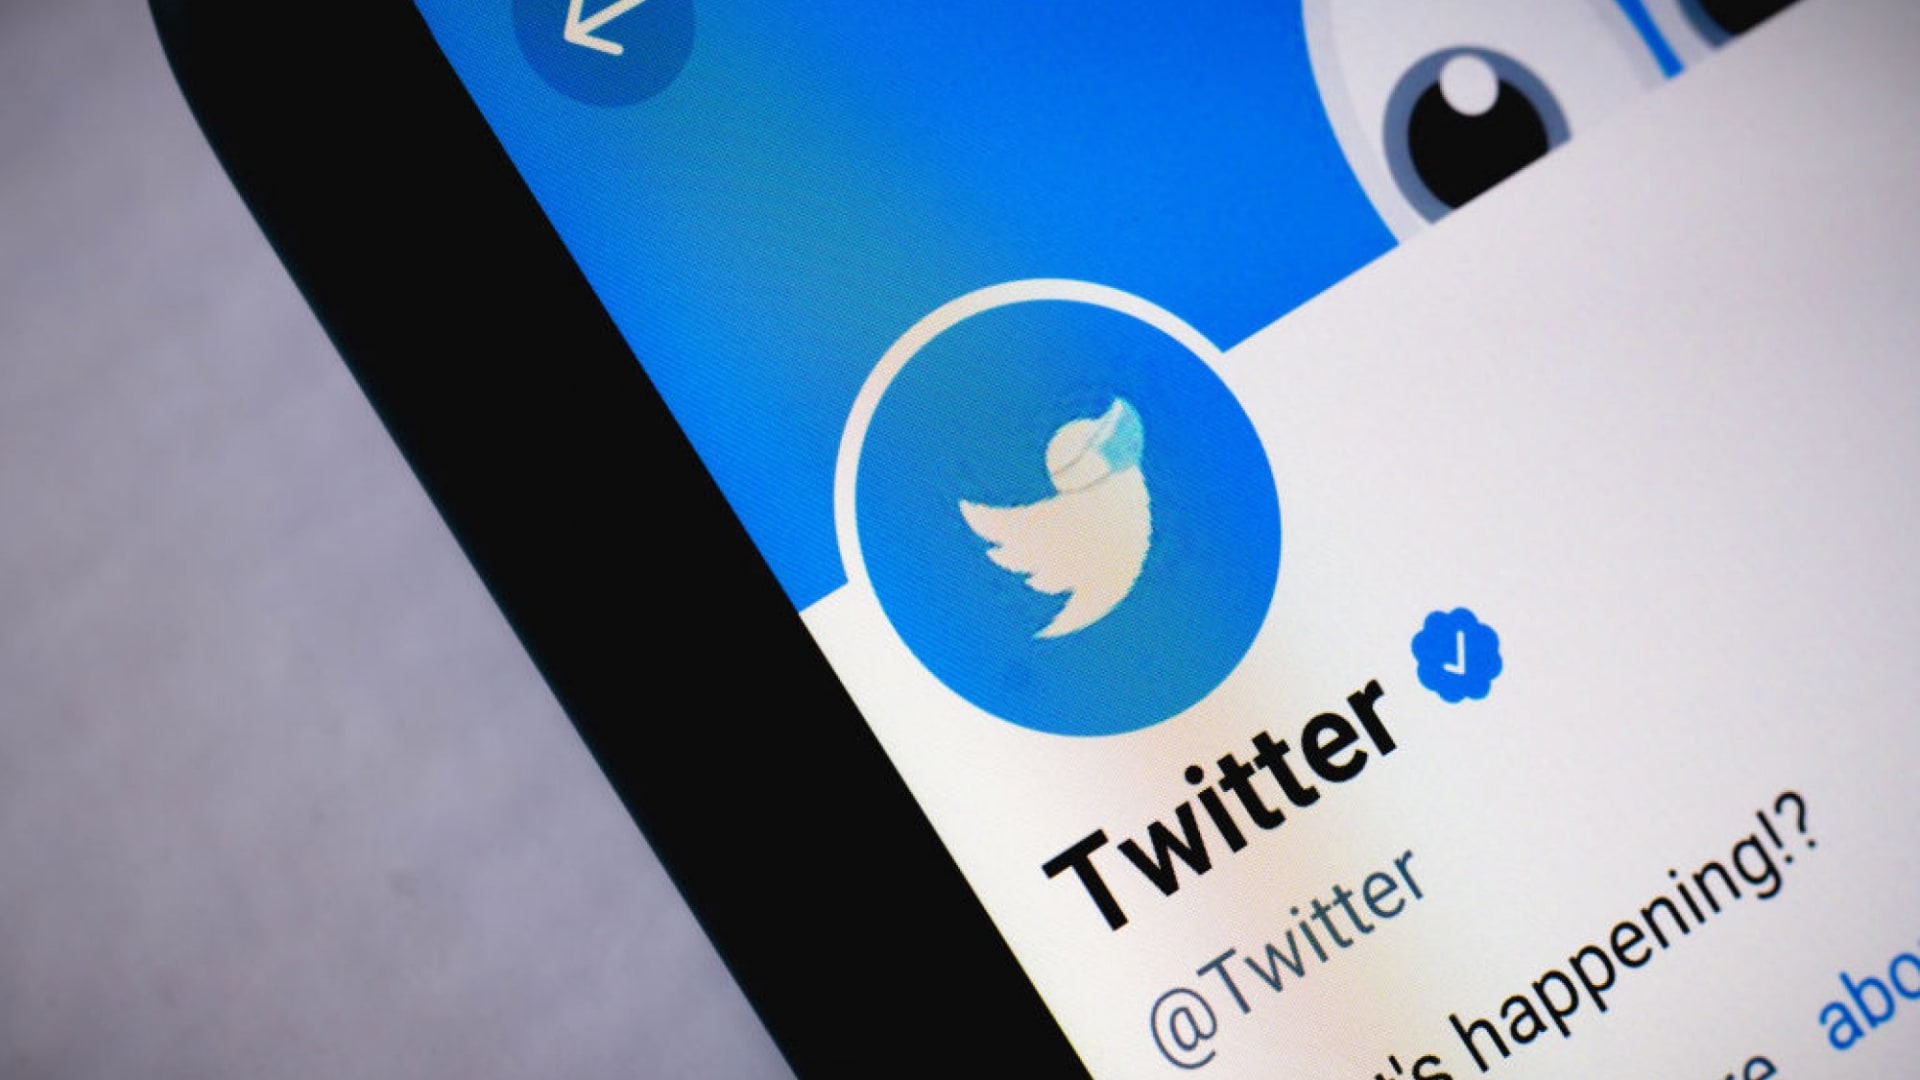 Twitter Verification Is Back. How to Get a Little Blue Check Mark Next to Your Name